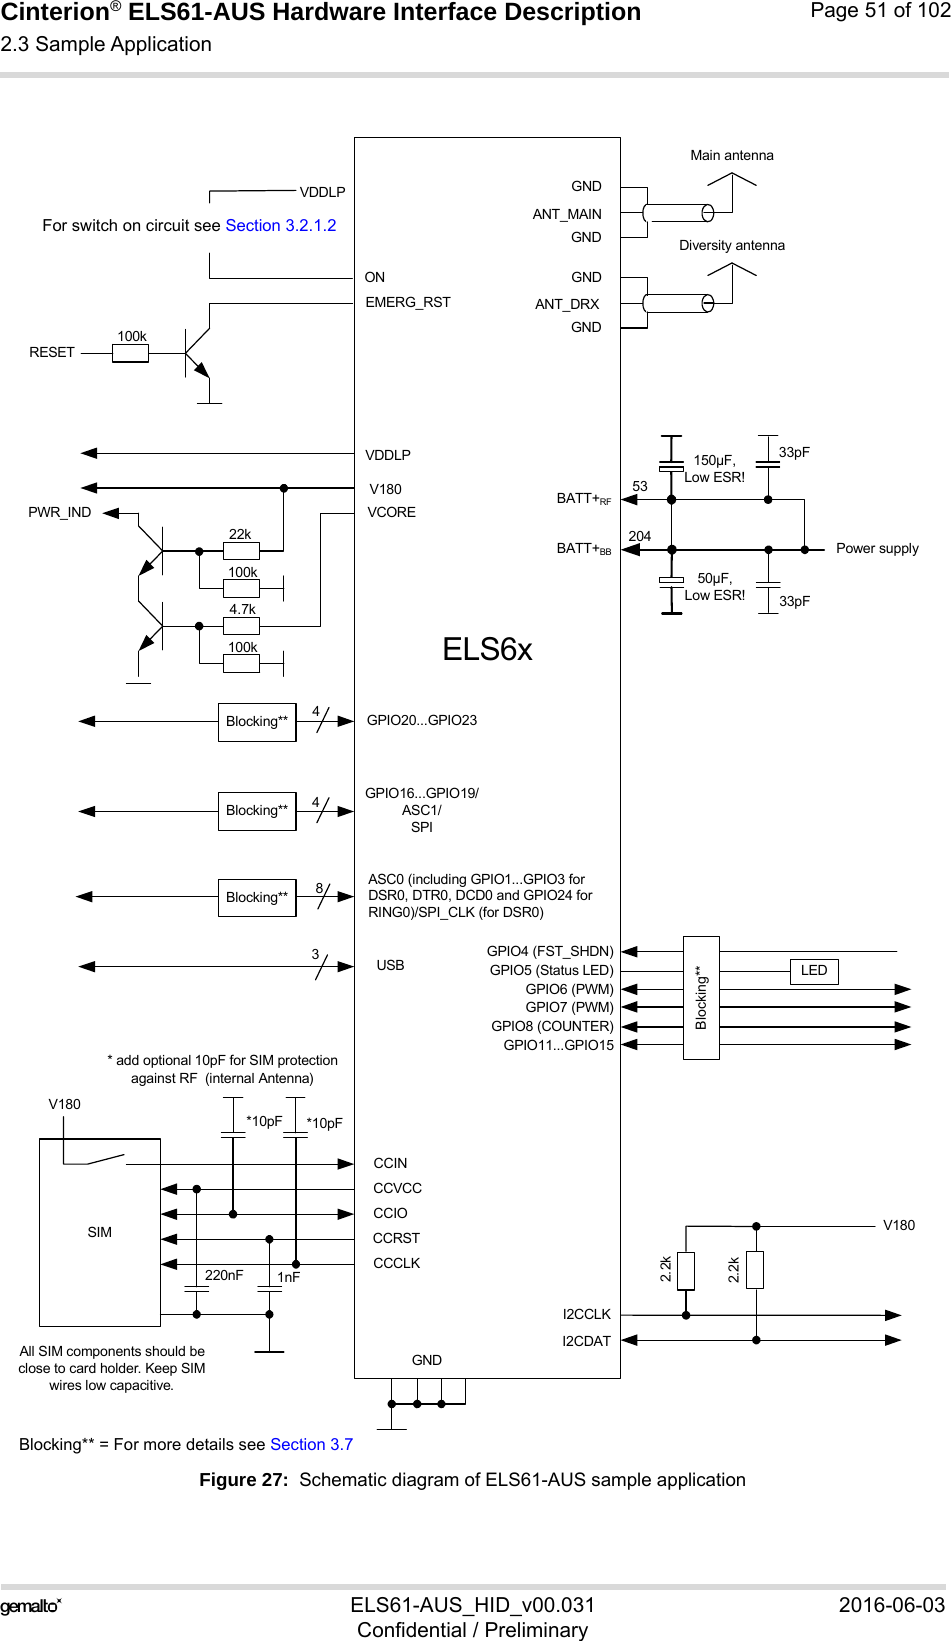 Cinterion® ELS61-AUS Hardware Interface Description2.3 Sample Application52ELS61-AUS_HID_v00.031 2016-06-03Confidential / PreliminaryPage 51 of 102Figure 27:  Schematic diagram of ELS61-AUS sample applicationVCOREV180ASC0 (including GPIO1...GPIO3 for DSR0, DTR0, DCD0 and GPIO24 for RING0)/SPI_CLK (for DSR0)GPIO16...GPIO19/ASC1/SPI84CCVCCCCIOCCCLKCCINCCRSTSIMV180220nF 1nFI2CCLKI2CDAT2.2kV180GPIO4 (FST_SHDN) GPIO5 (Status LED)GPIO6 (PWM)GPIO7 (PWM)GPIO8 (COUNTER)GPIO11...GPIO15LEDGNDGNDGNDANT_MAINBATT+RFPower supplyMain antennaELS6xAll SIM components should be close to card holder. Keep SIM wires low capacitive.*10pF *10pF* add optional 10pF for SIM protection against RF  (internal Antenna)50µF,Low ESR! 33pFBlocking**Blocking**Blocking**PWR_INDBATT+BB53204GPIO20...GPIO234Blocking**100k4.7k100k22k2.2k3USB150µF,Low ESR!33pFGNDGNDANT_DRXDiversity antennaONEMERG_RSTRESETVDDLP100kVDDLPBlocking** = For more details see Section 3.7For switch on circuit see Section 3.2.1.2